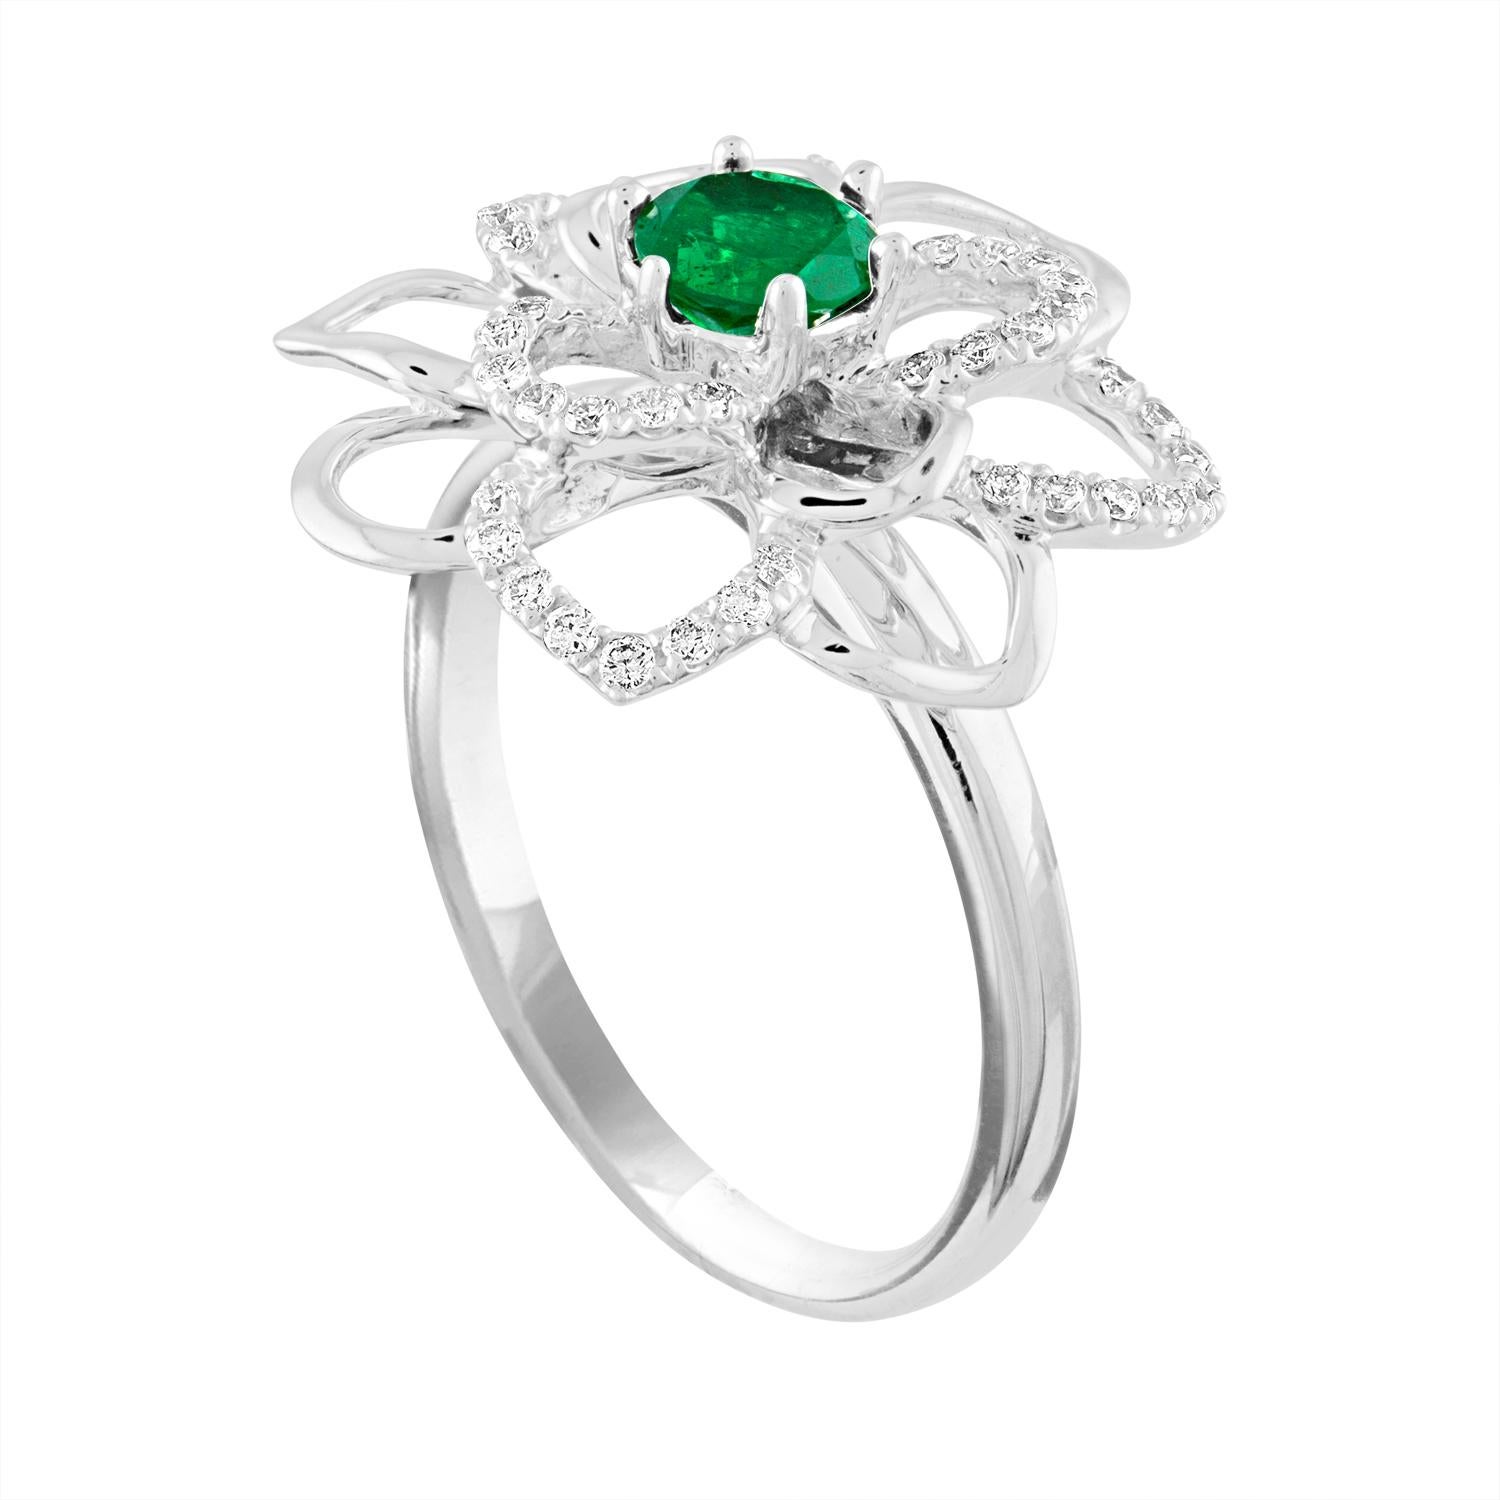 Stunning Emerald Diamond Ring
The ring is 18K White Gold
The Round Emerald is 0.44 Carats
There are 0.26 Carats in Diamonds F/G VS/SI
The size is a 6.75, sizable.
The ring weighs 4.5 grams